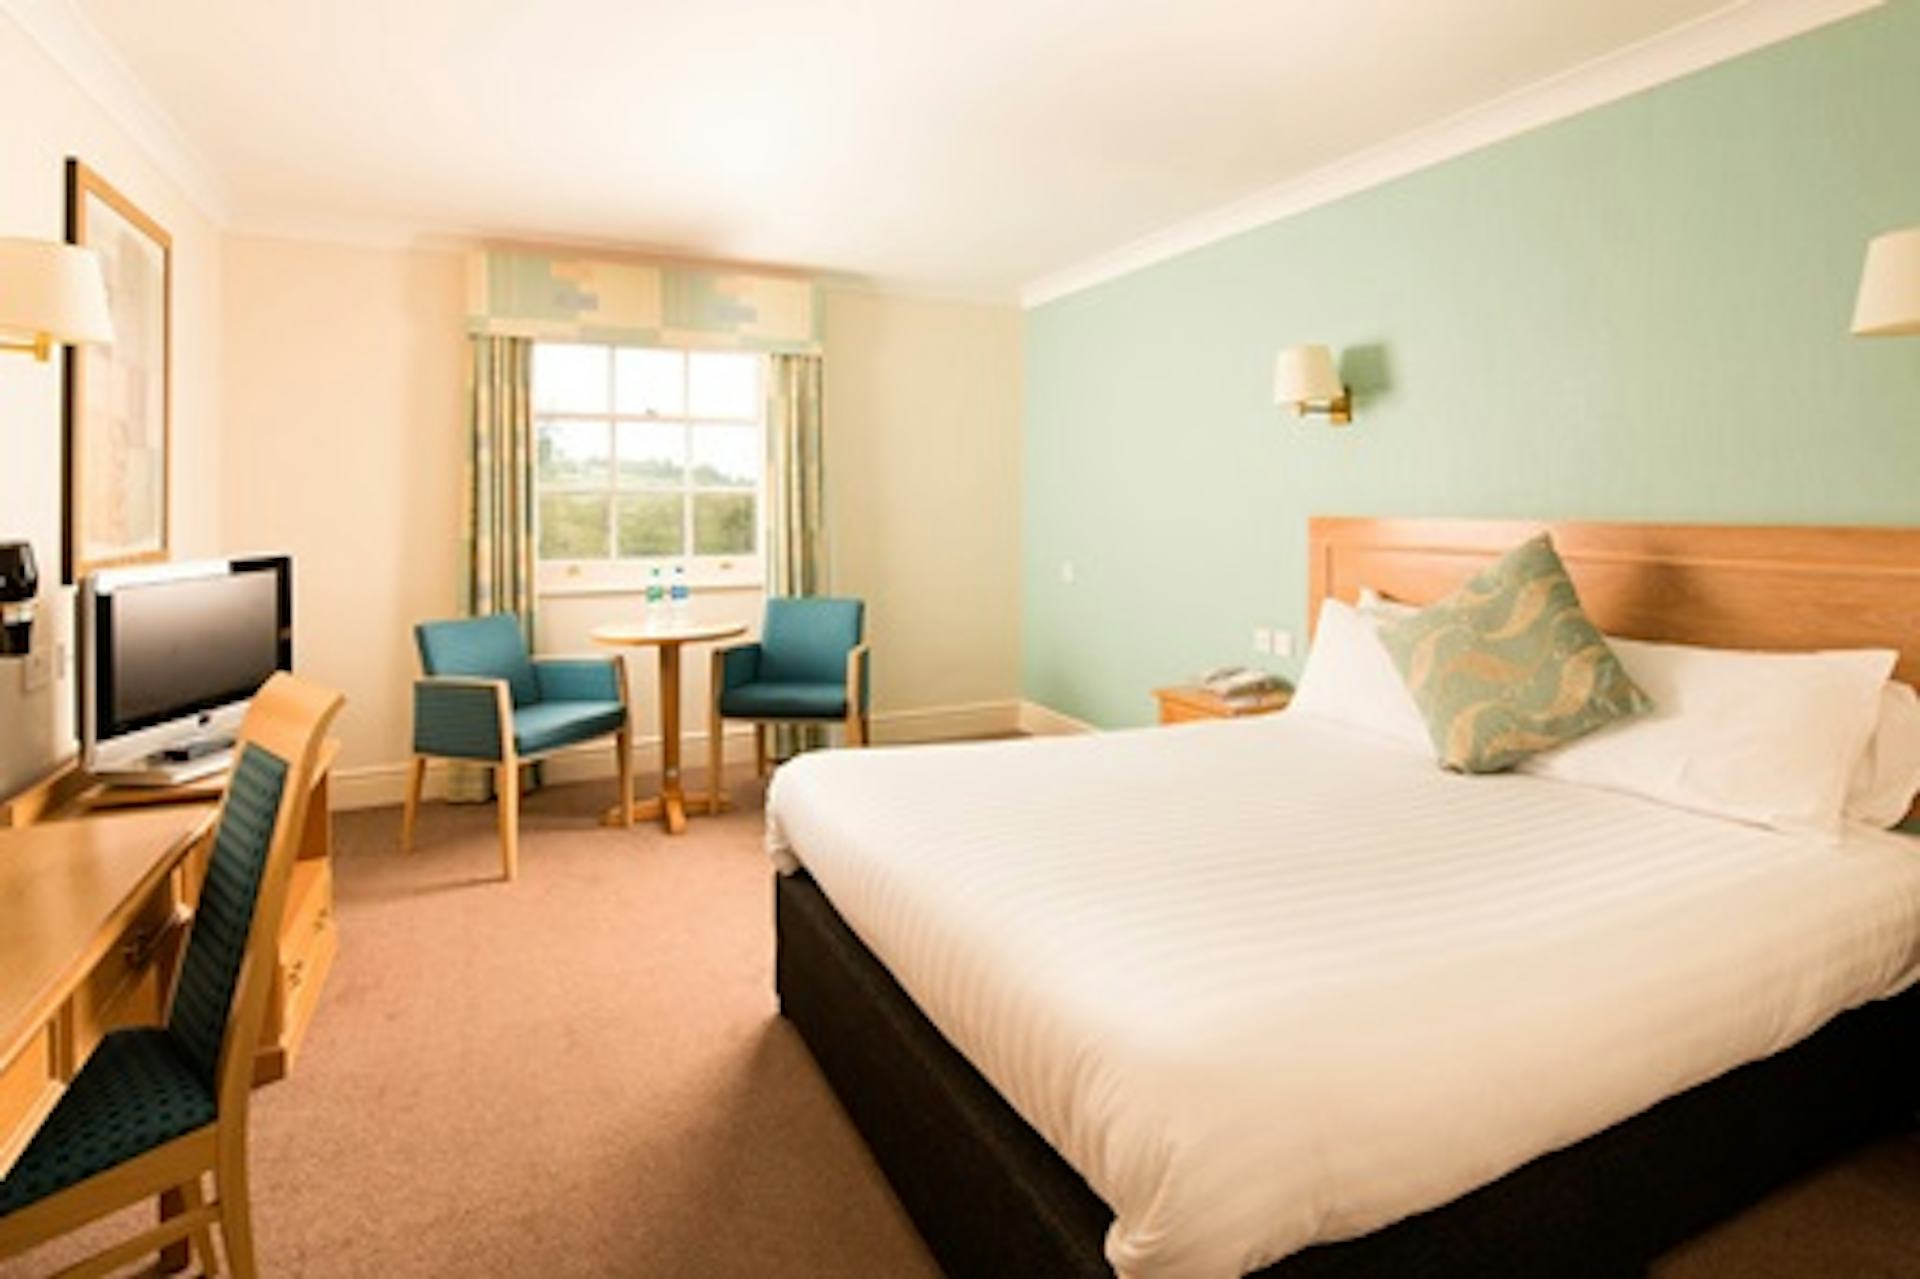 One Night Break for Two at the Bowden Hall Hotel, Gloucester